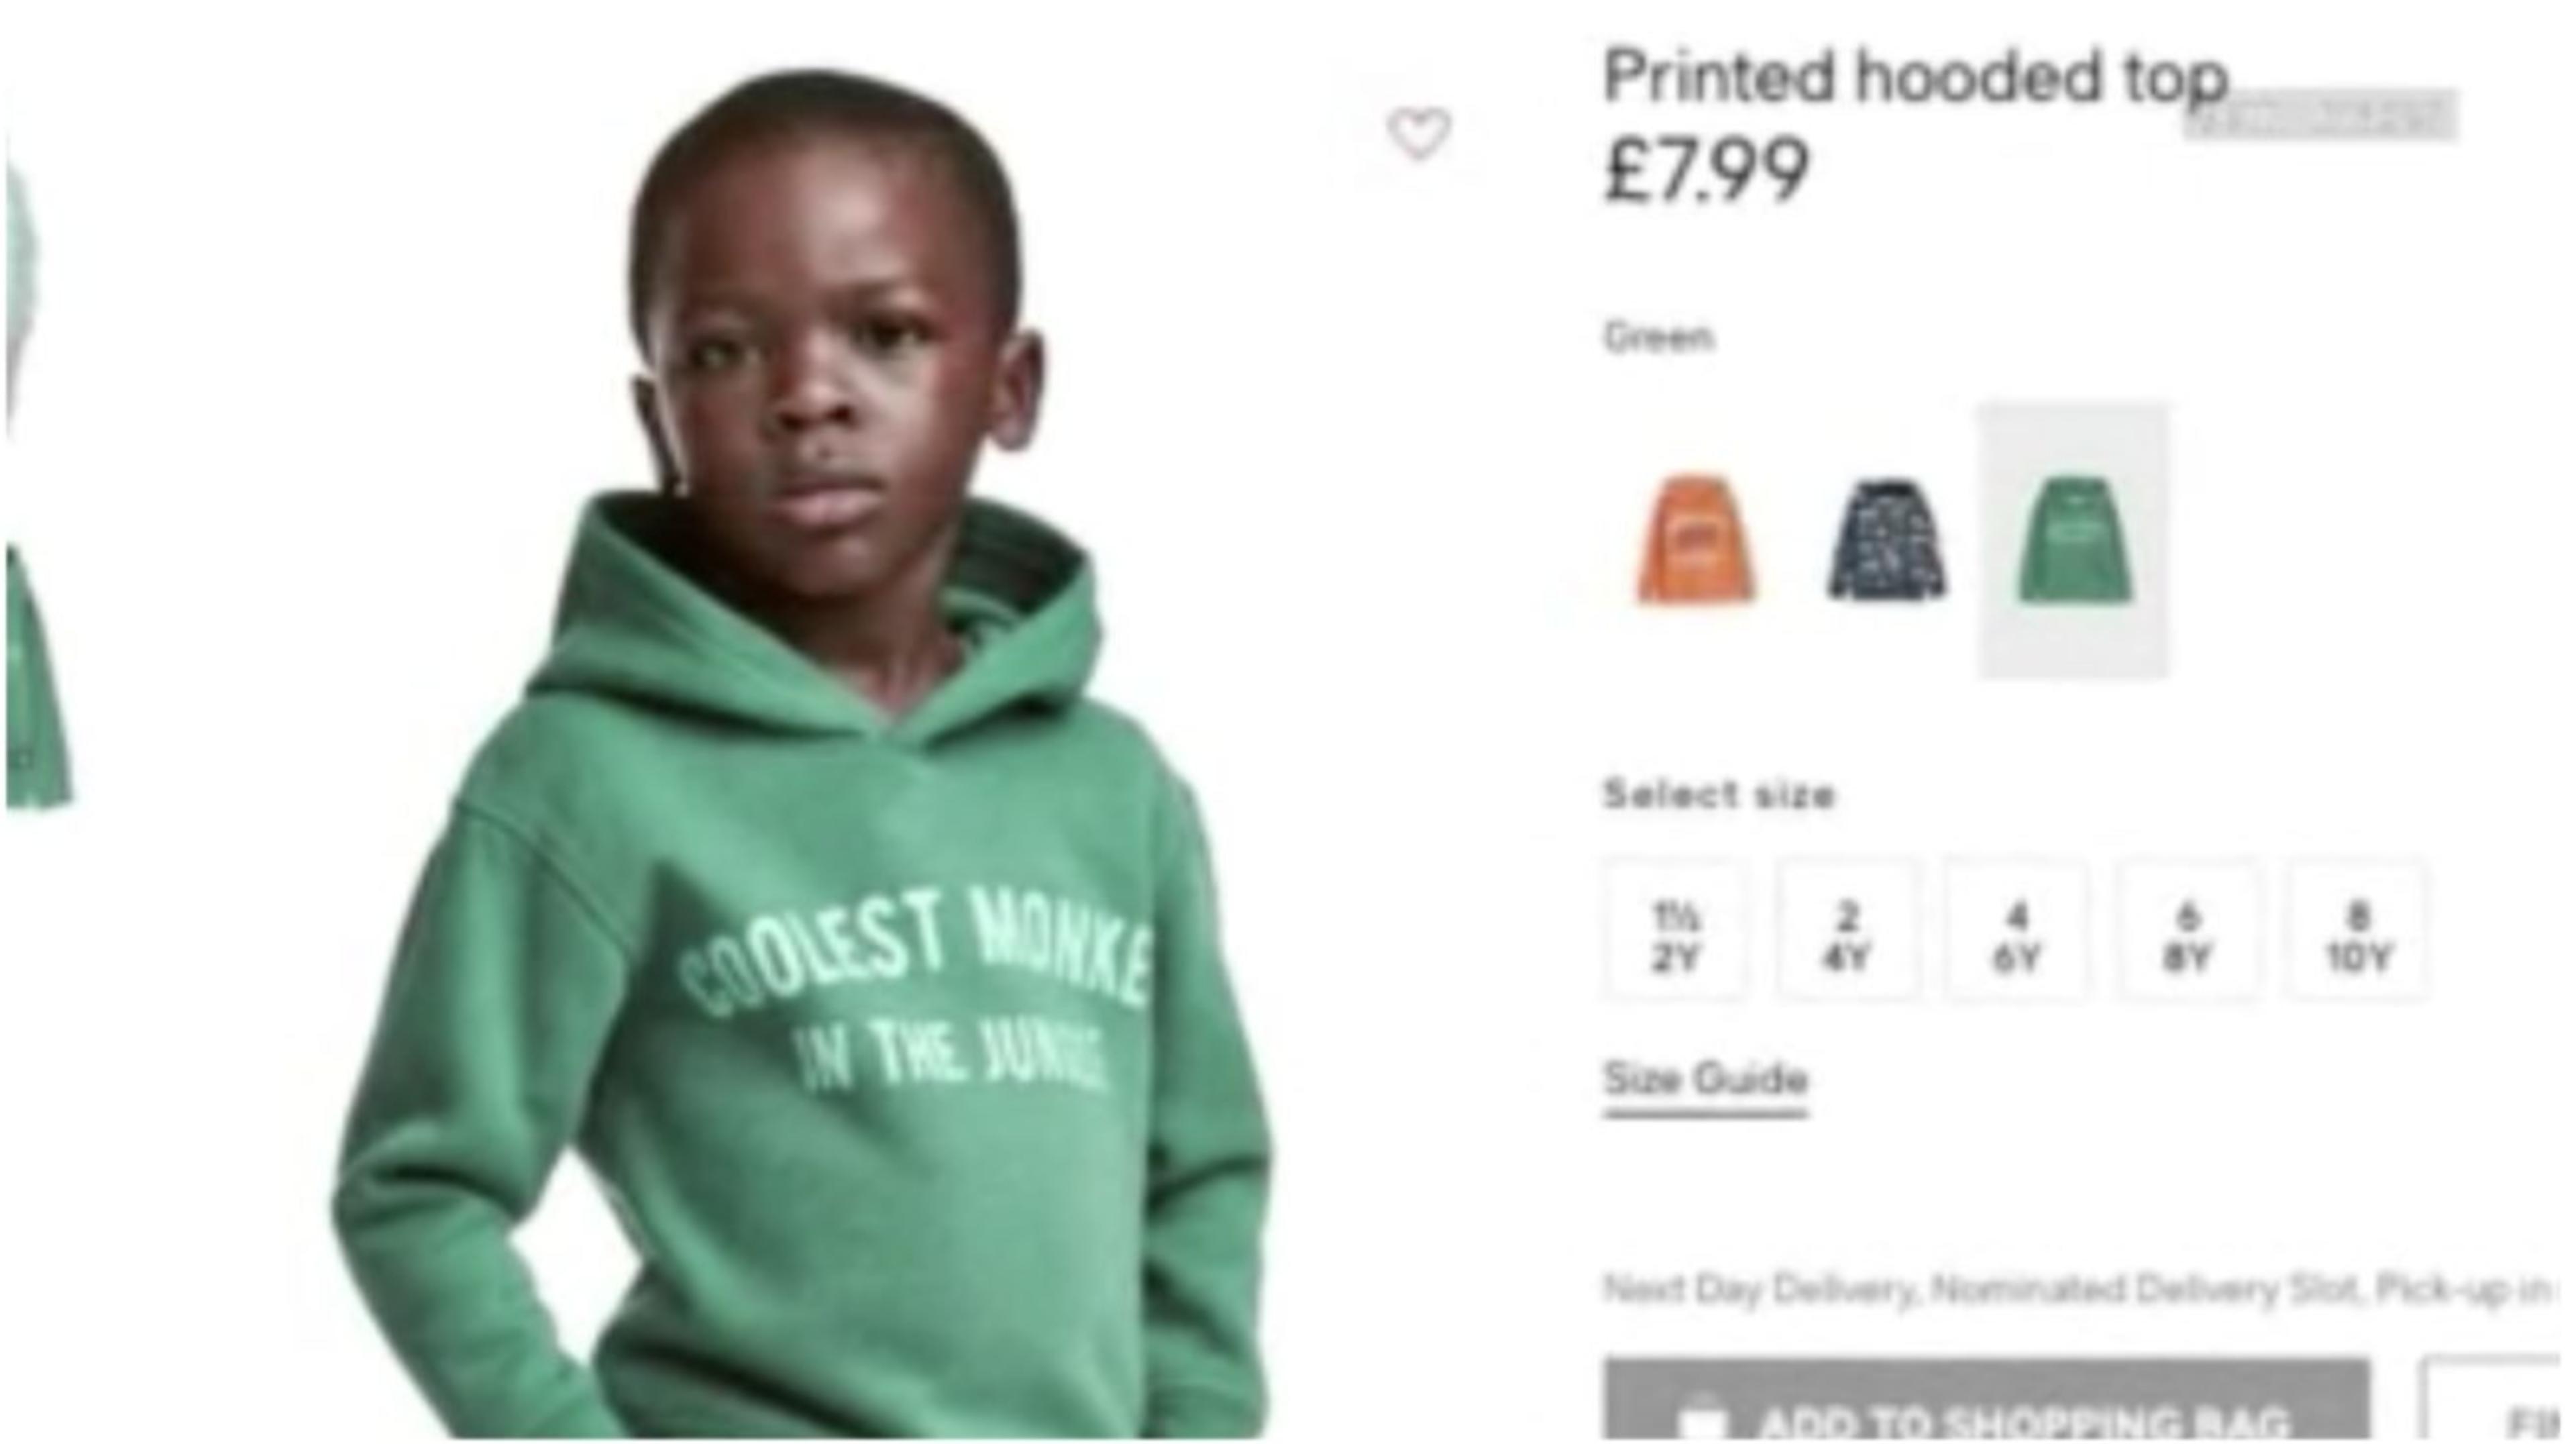 Brand gets it wrong, outrage over racist product.